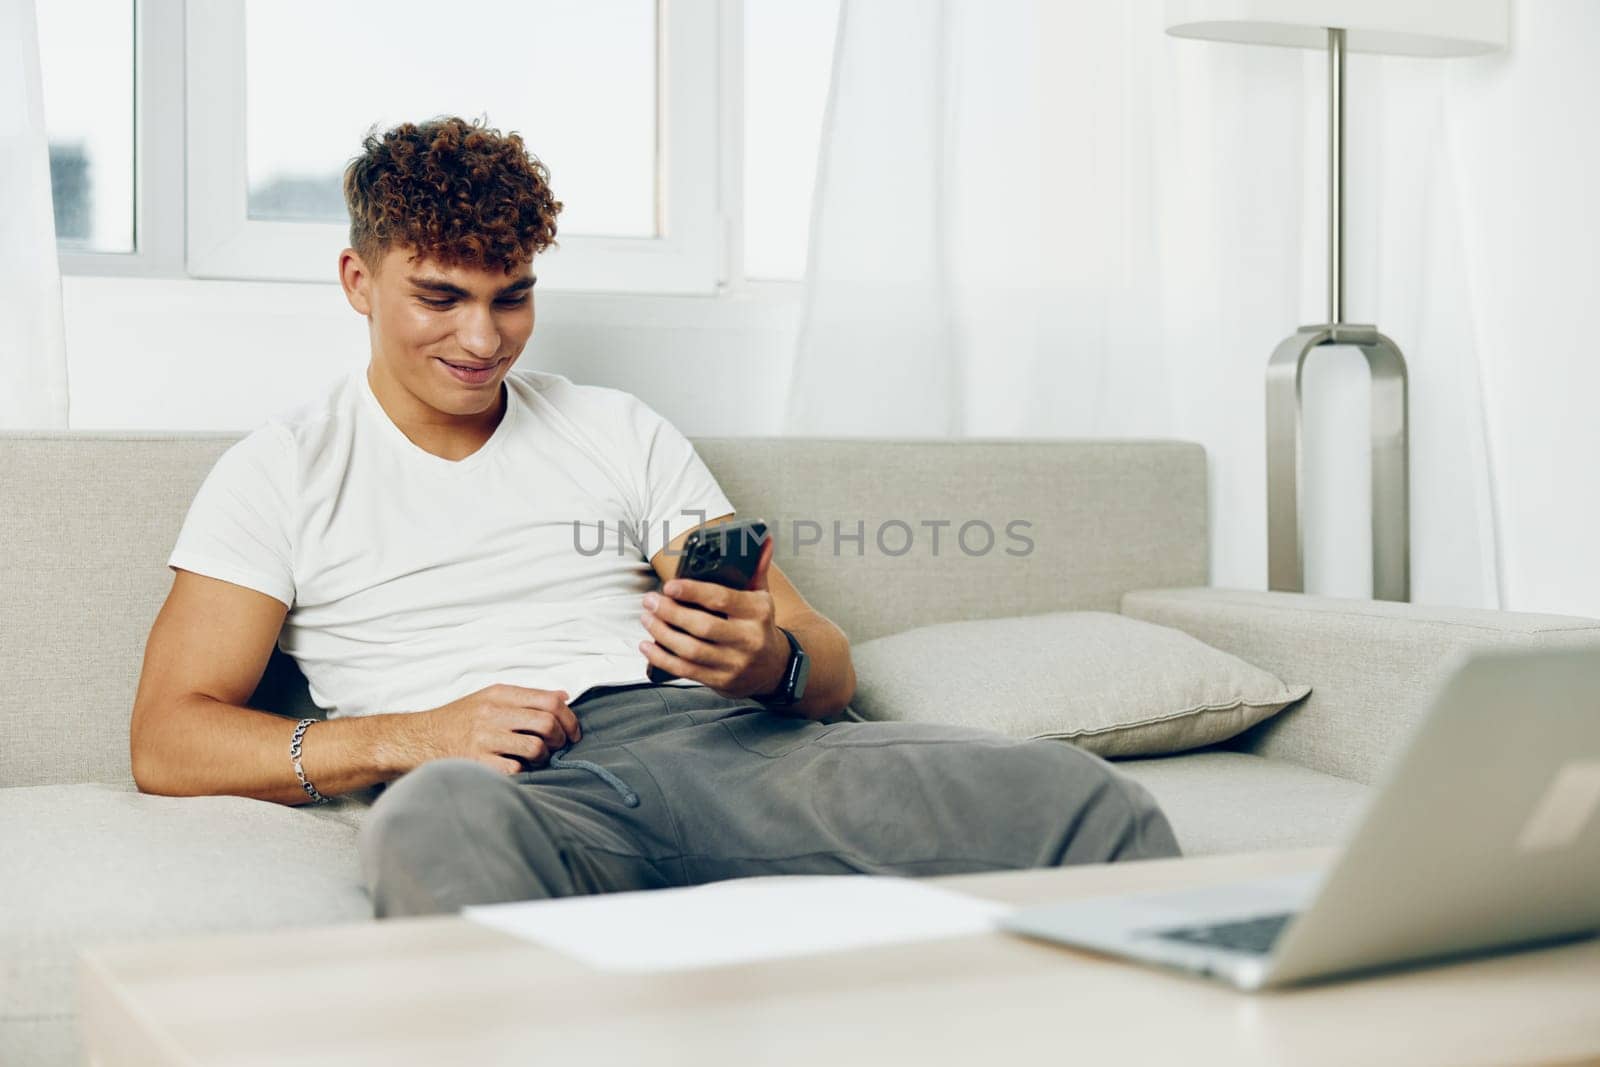 man interior curly person male home modern cyberspace cell sitting young teenager internet communication student business text smartphone message